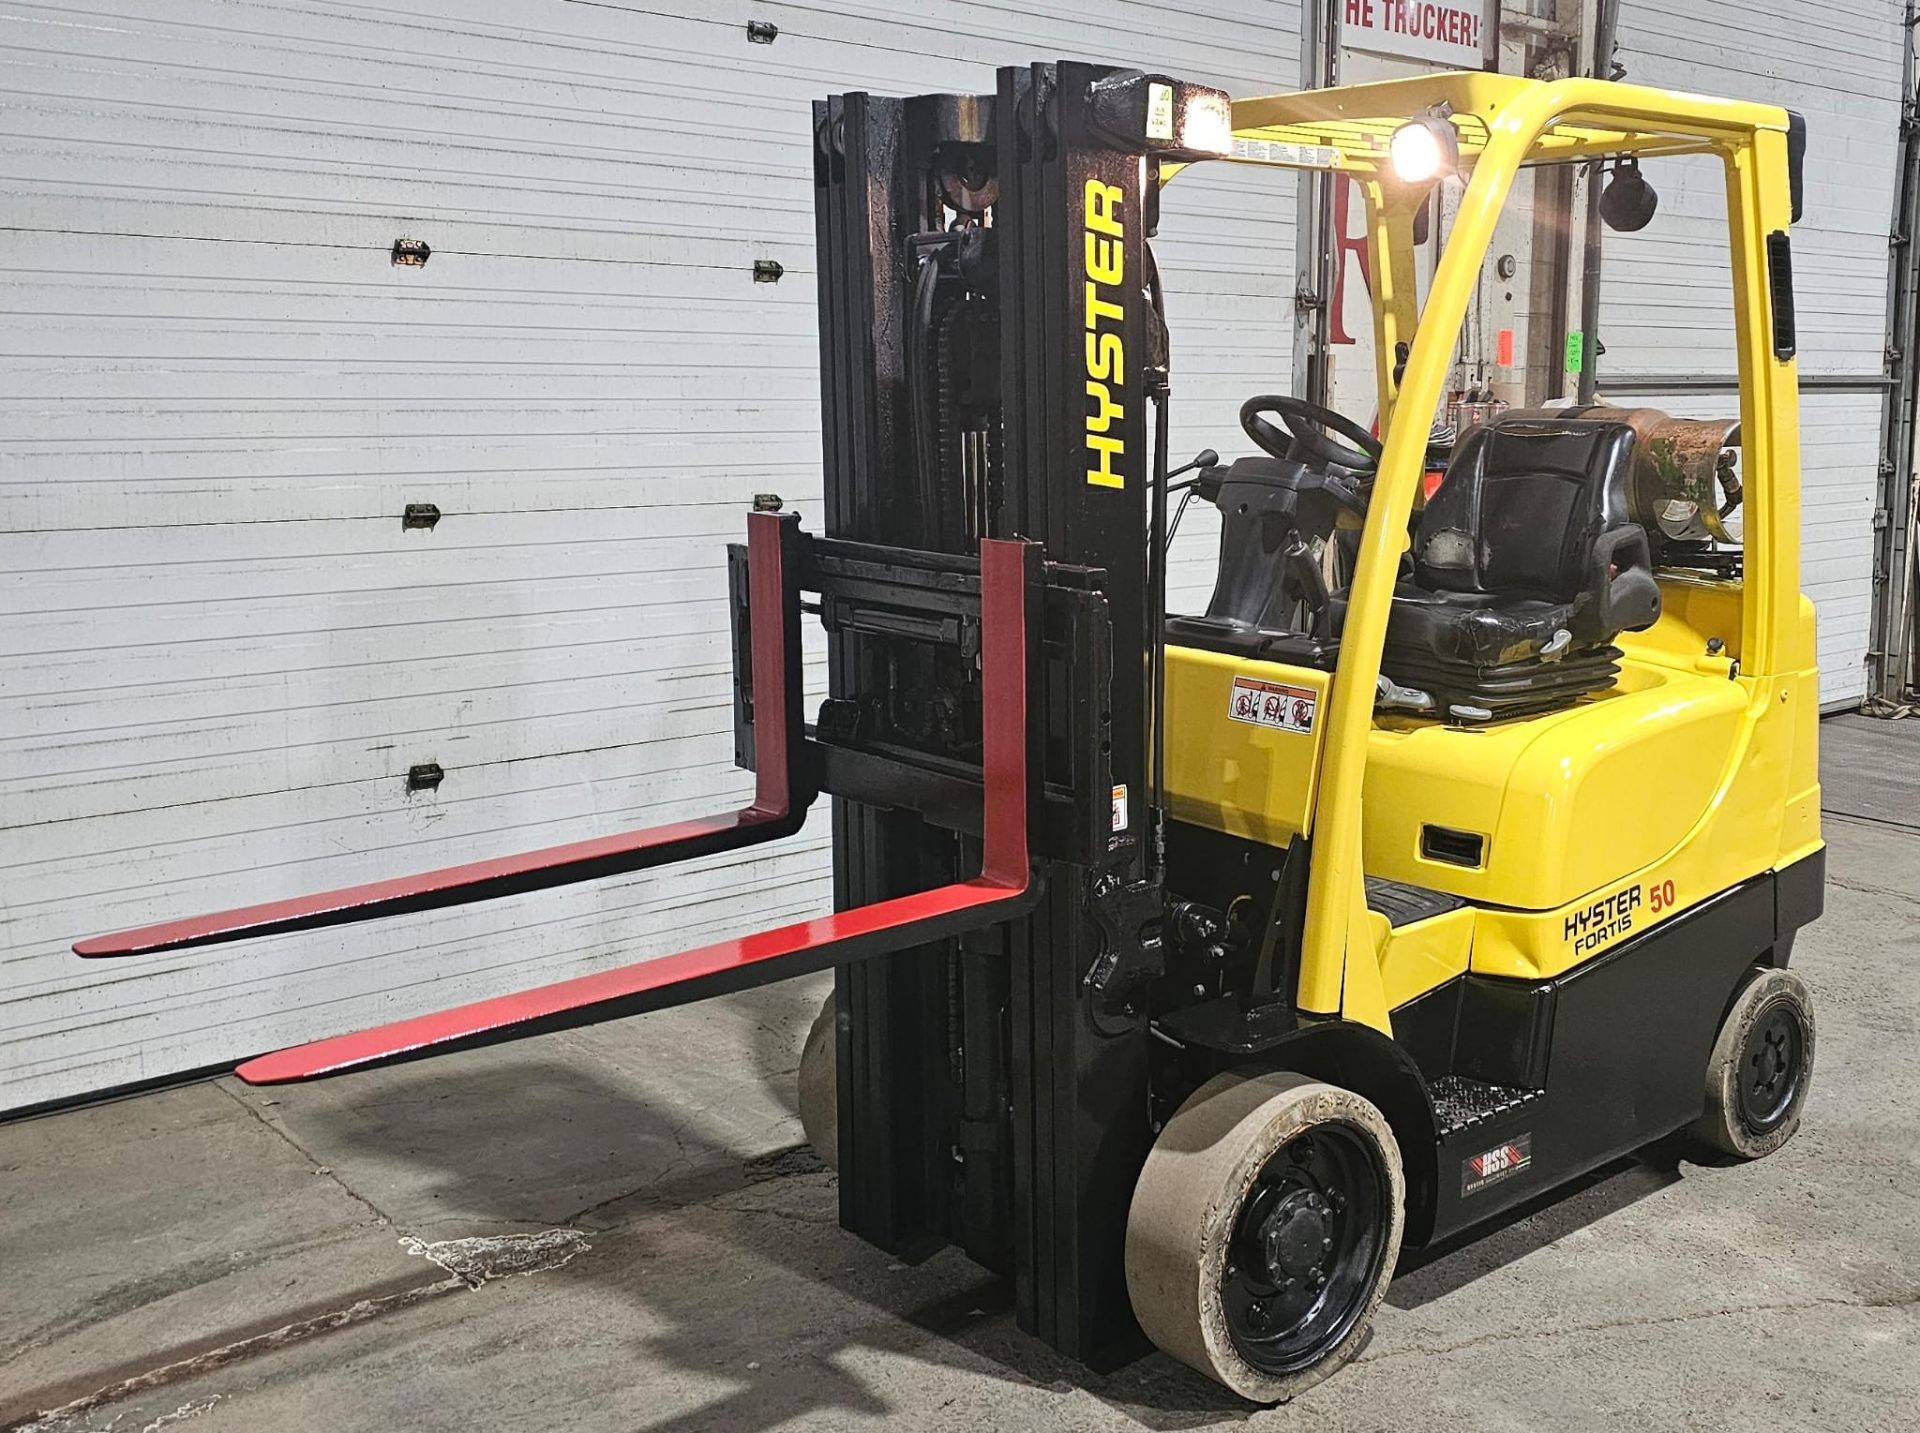 2015 Hyster 5,000lbs Capacity LPG (Propane) Forklift with sideshift & 3-STAGE MAST & Non marking - Image 2 of 4